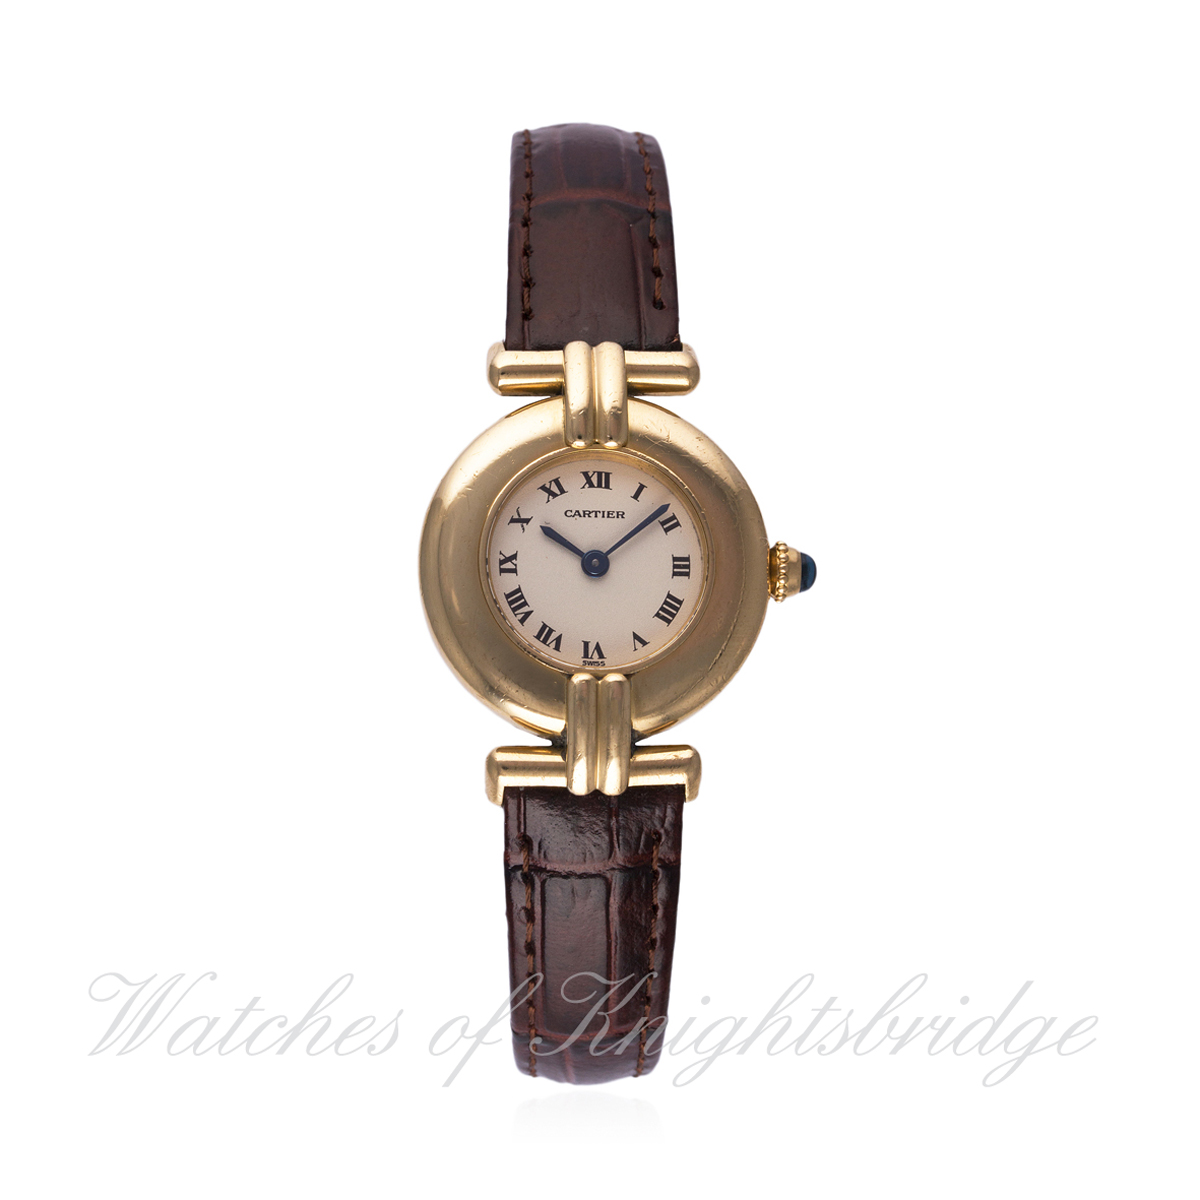 A LADIES 18K SOLID GOLD CARTIER WRIST WATCH CIRCA 1990s, REF. 1980 D: Silver dial with applied Roman